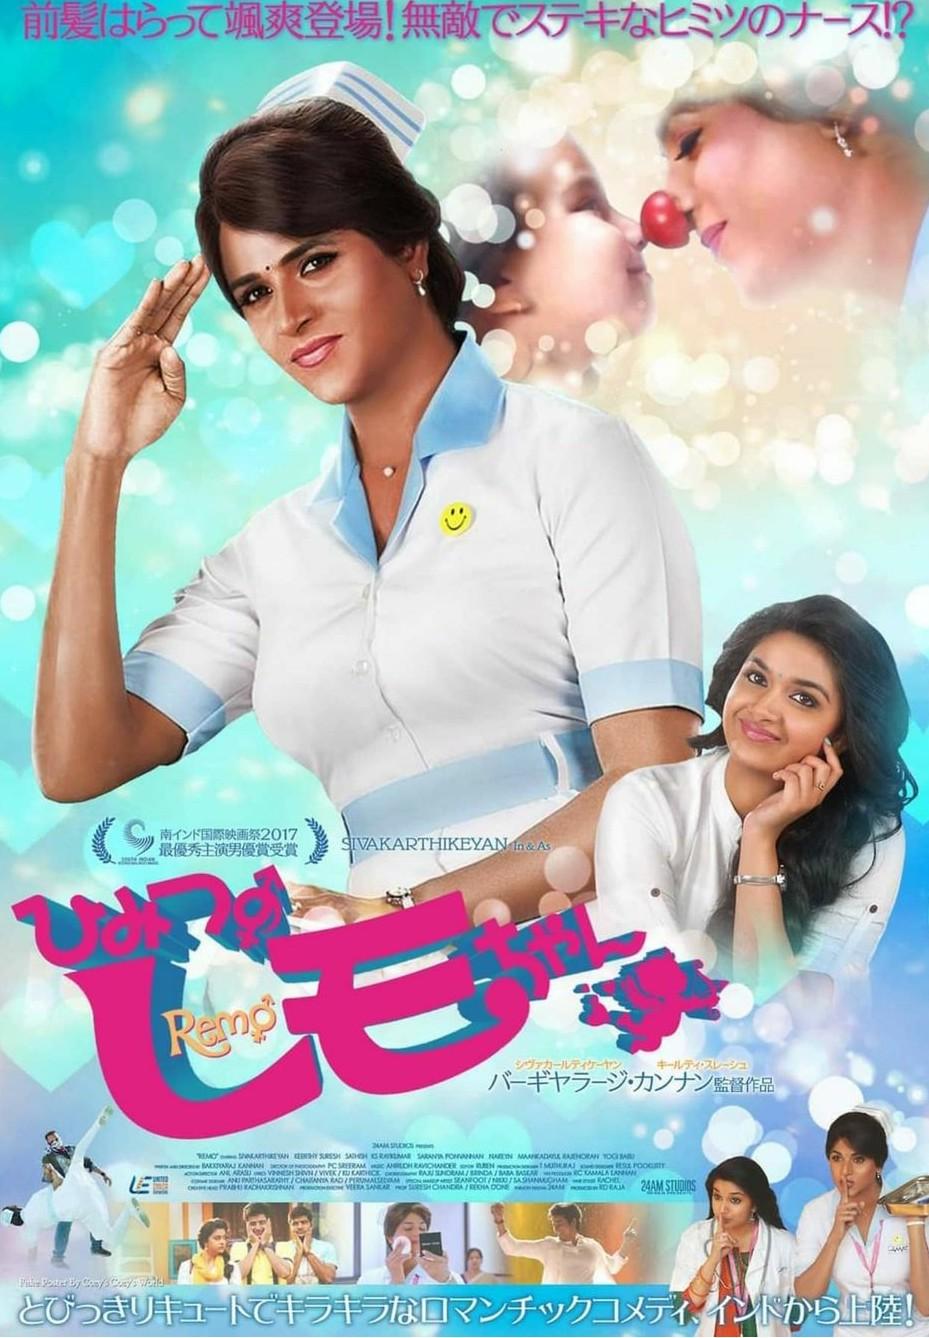 Japanese Posters of Tamil Movies A Collection Tamil Movie, Music